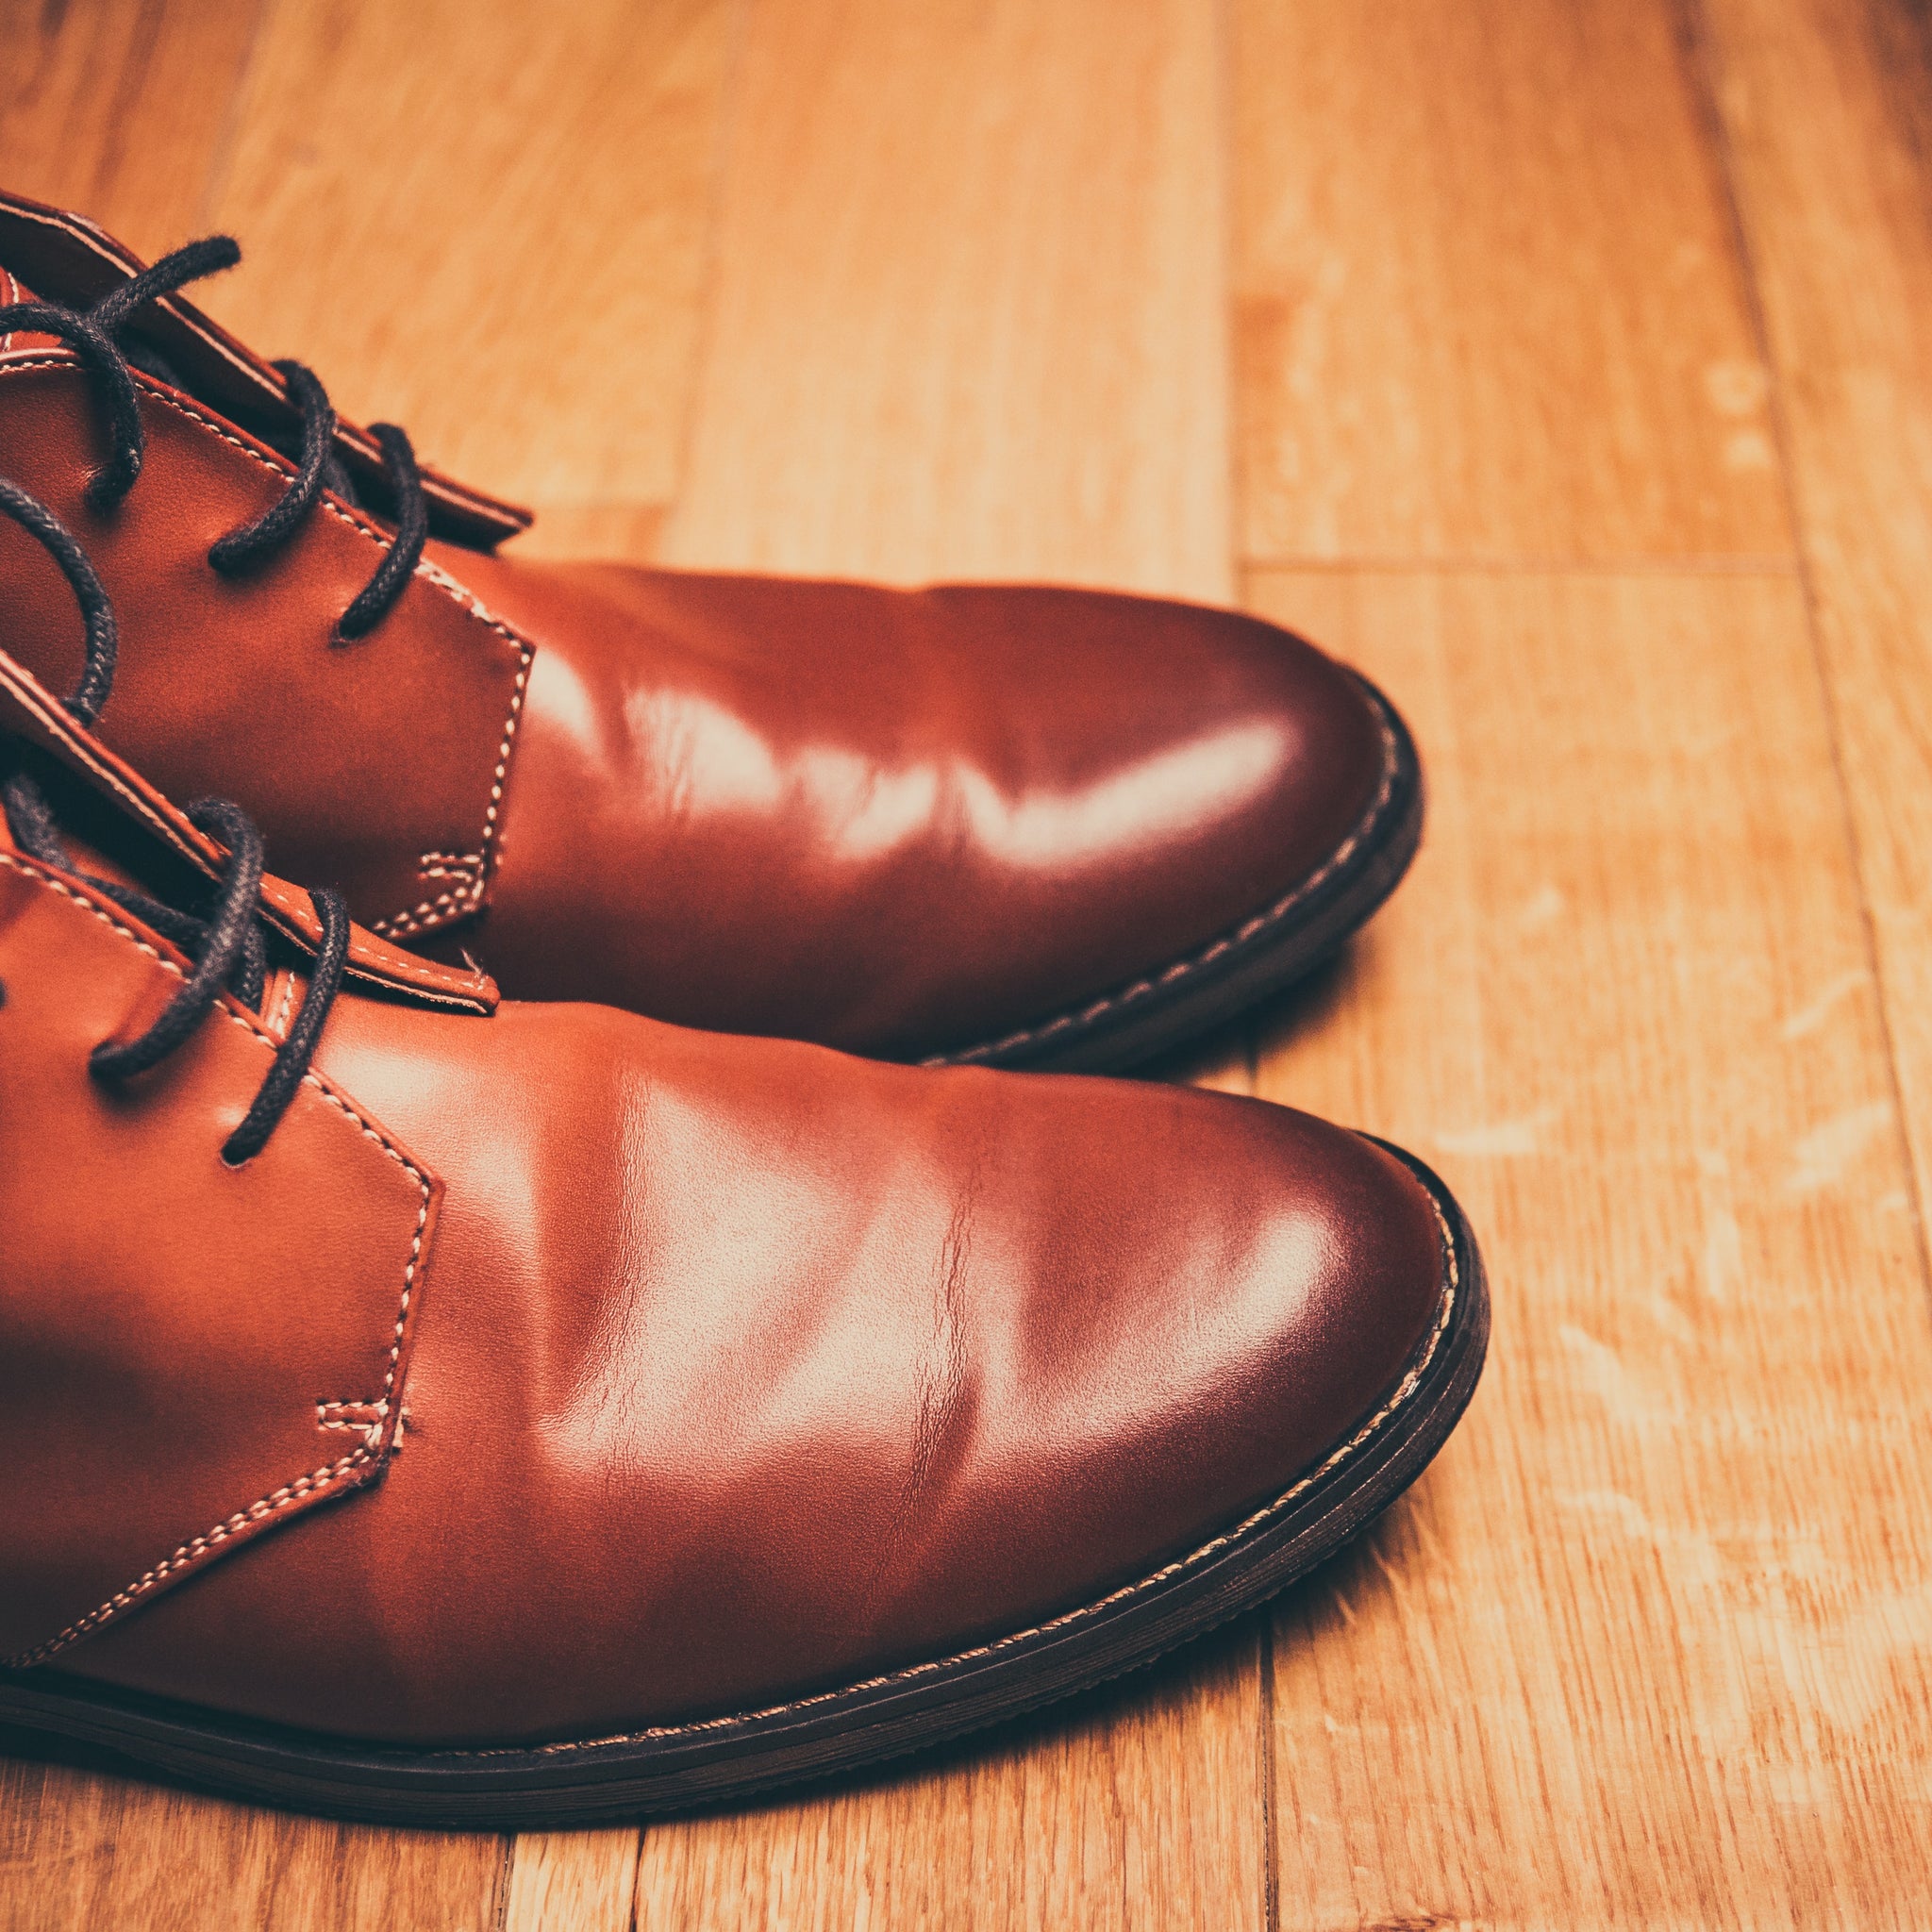 How to Care for Leather Shoes